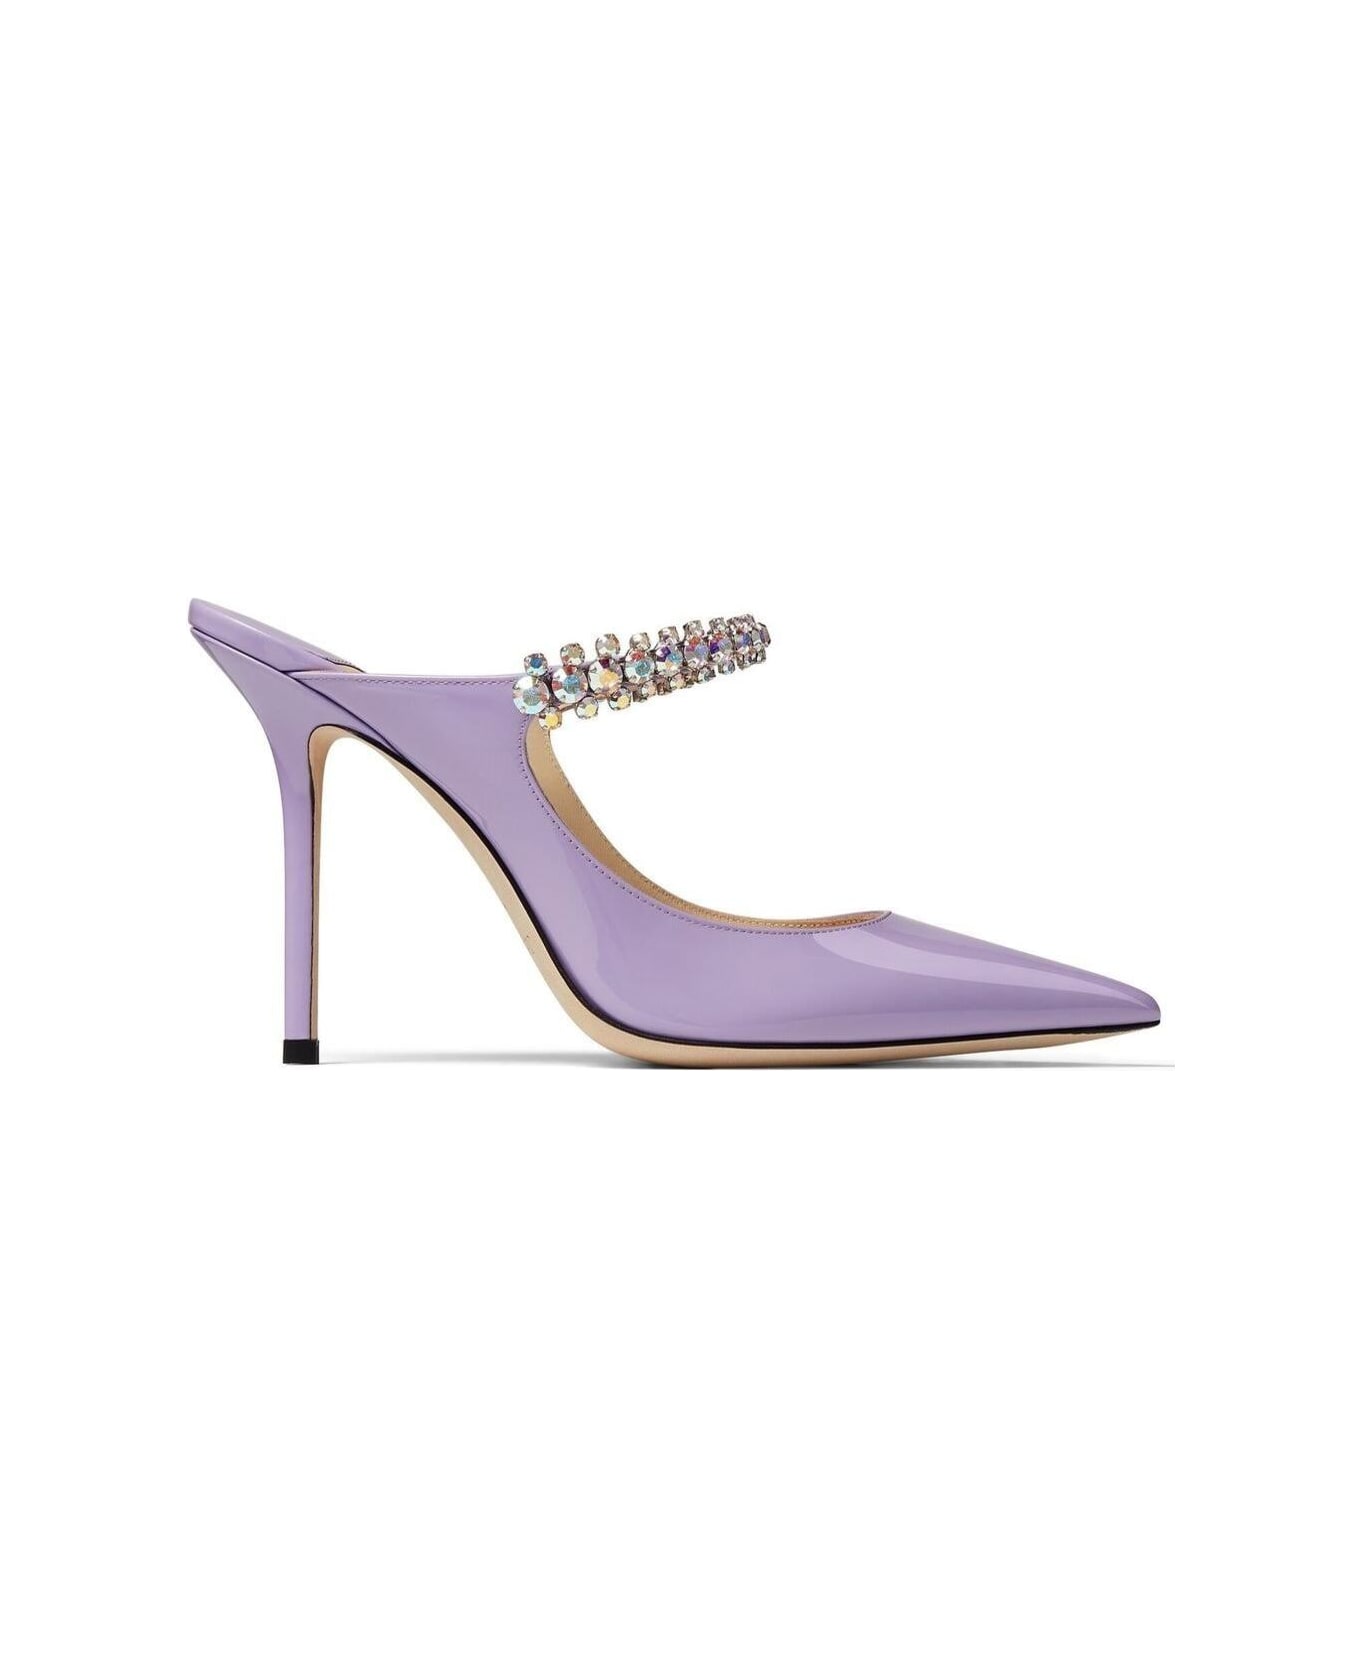 Jimmy Choo Lilac Patent Leather Pumps With Crystal Strap - Violet